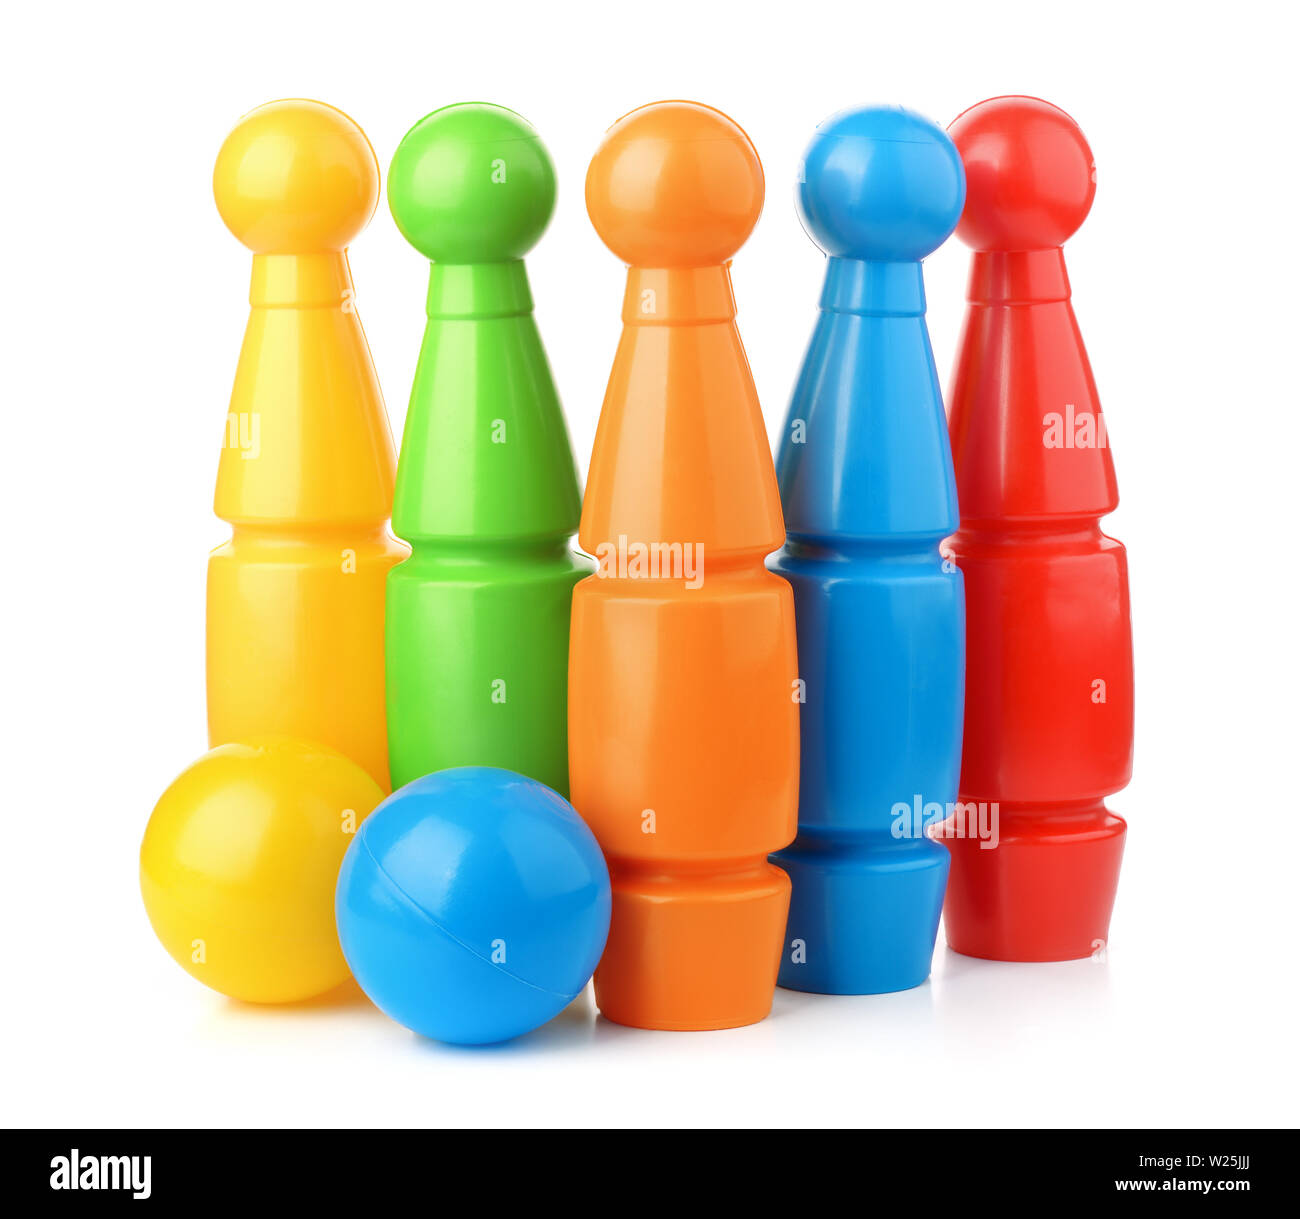 Front view of toy plastic bowling pins and balls isolated on white Stock Photo